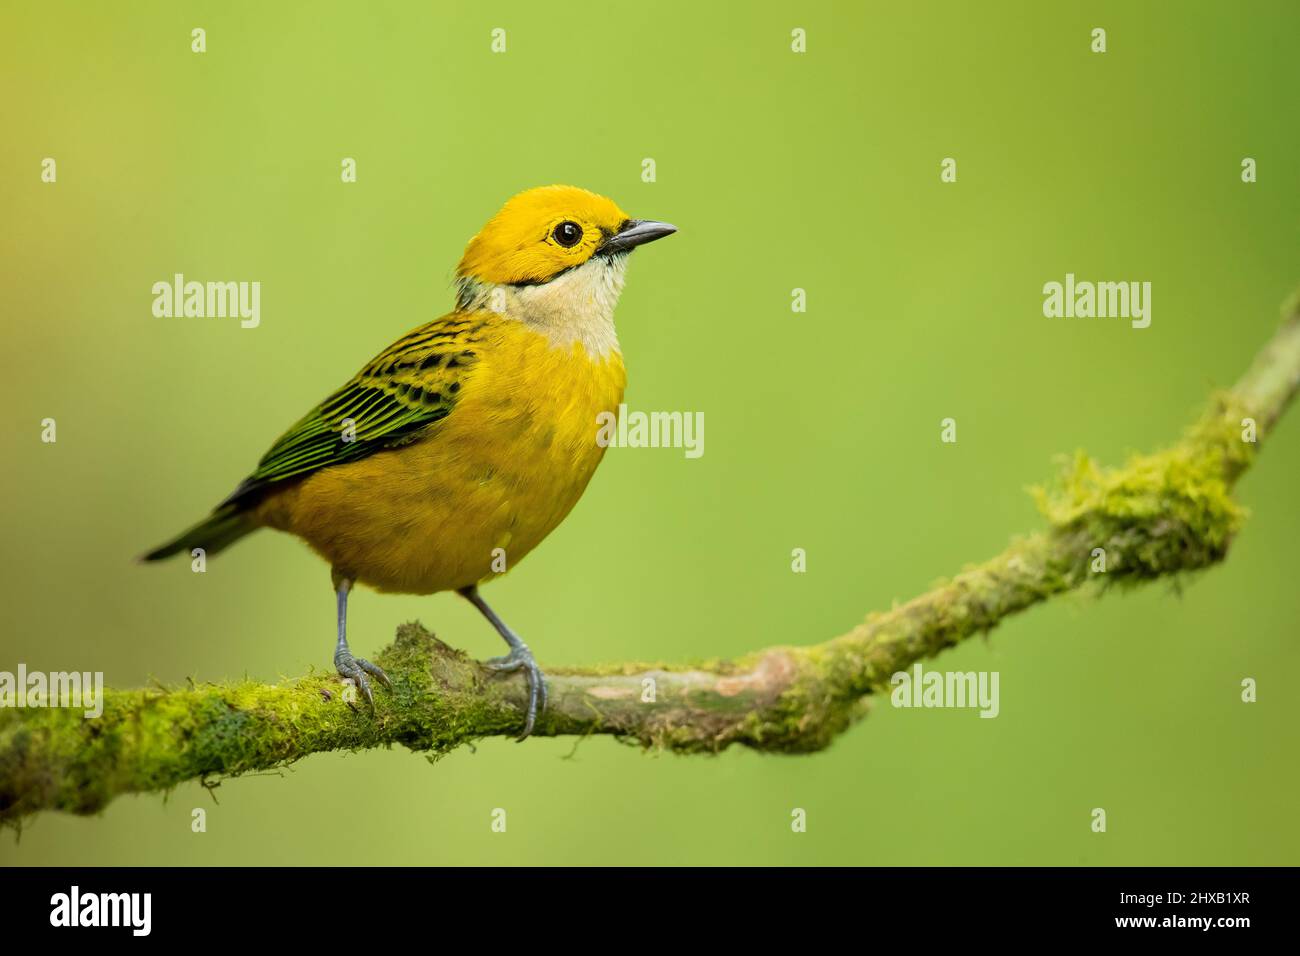 Silver-throated tanager Stock Photo